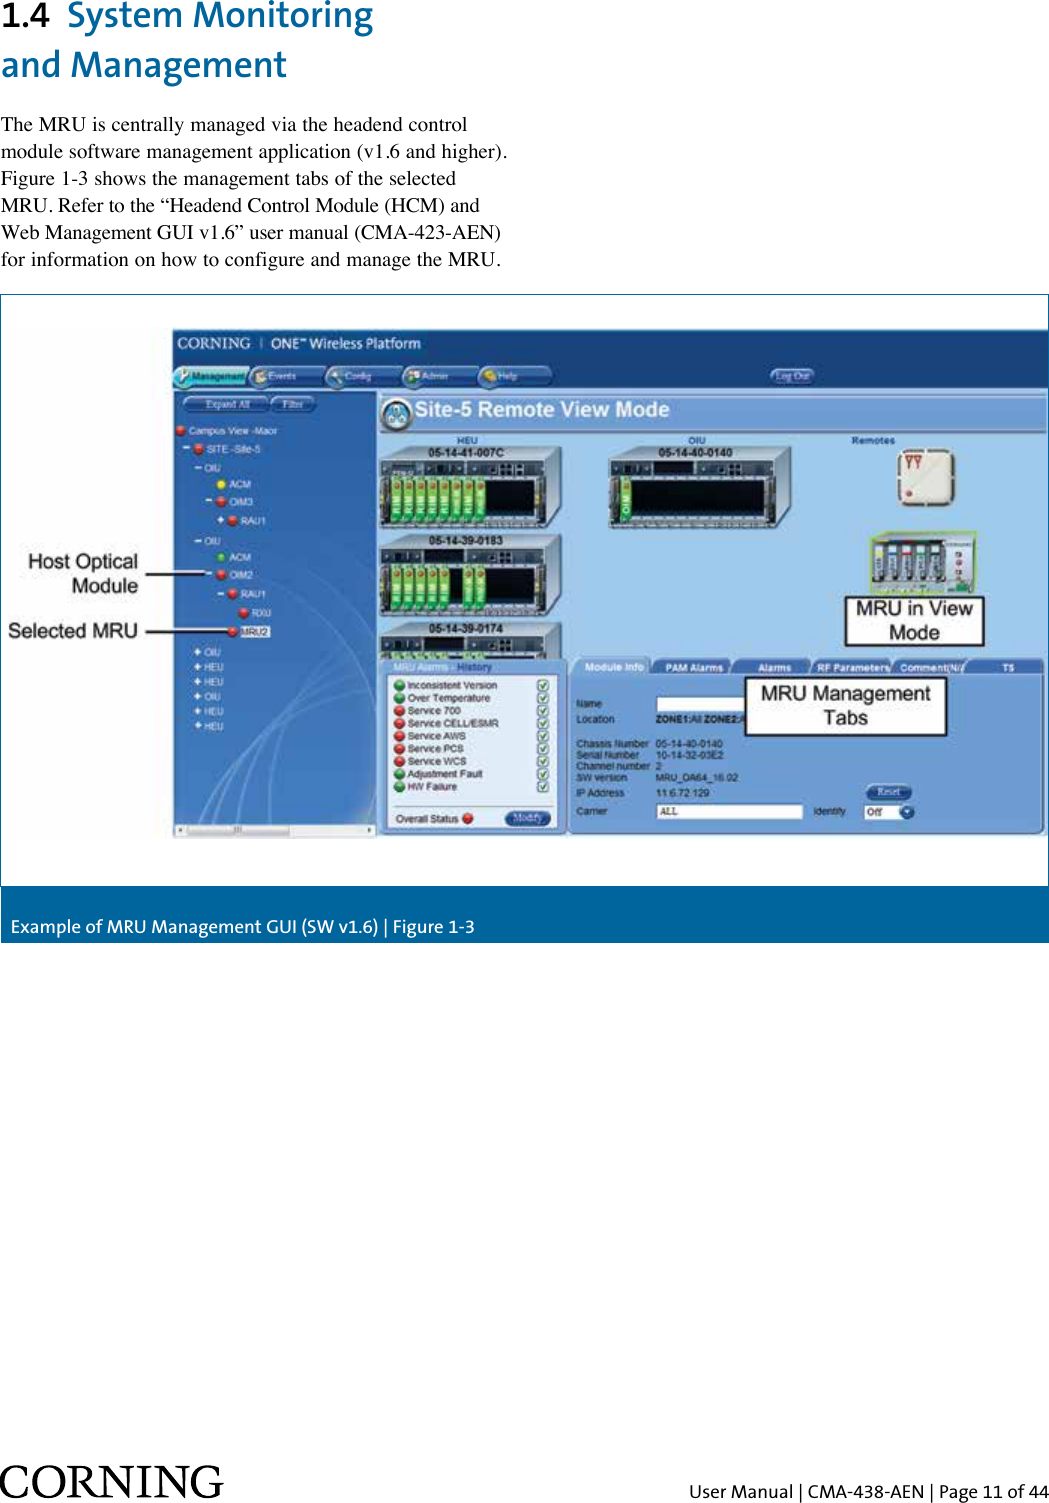 User Manual | CMA-438-AEN | Page 11 of 44Example of MRU Management GUI (SW v1.6) | Figure 1-31.4  System Monitoring  and ManagementThe MRU is centrally managed via the headend control module software management application (v1.6 and higher). Figure 1-3 shows the management tabs of the selected MRU. Refer to the “Headend Control Module (HCM) and Web Management GUI v1.6” user manual (CMA-423-AEN) for information on how to configure and manage the MRU.